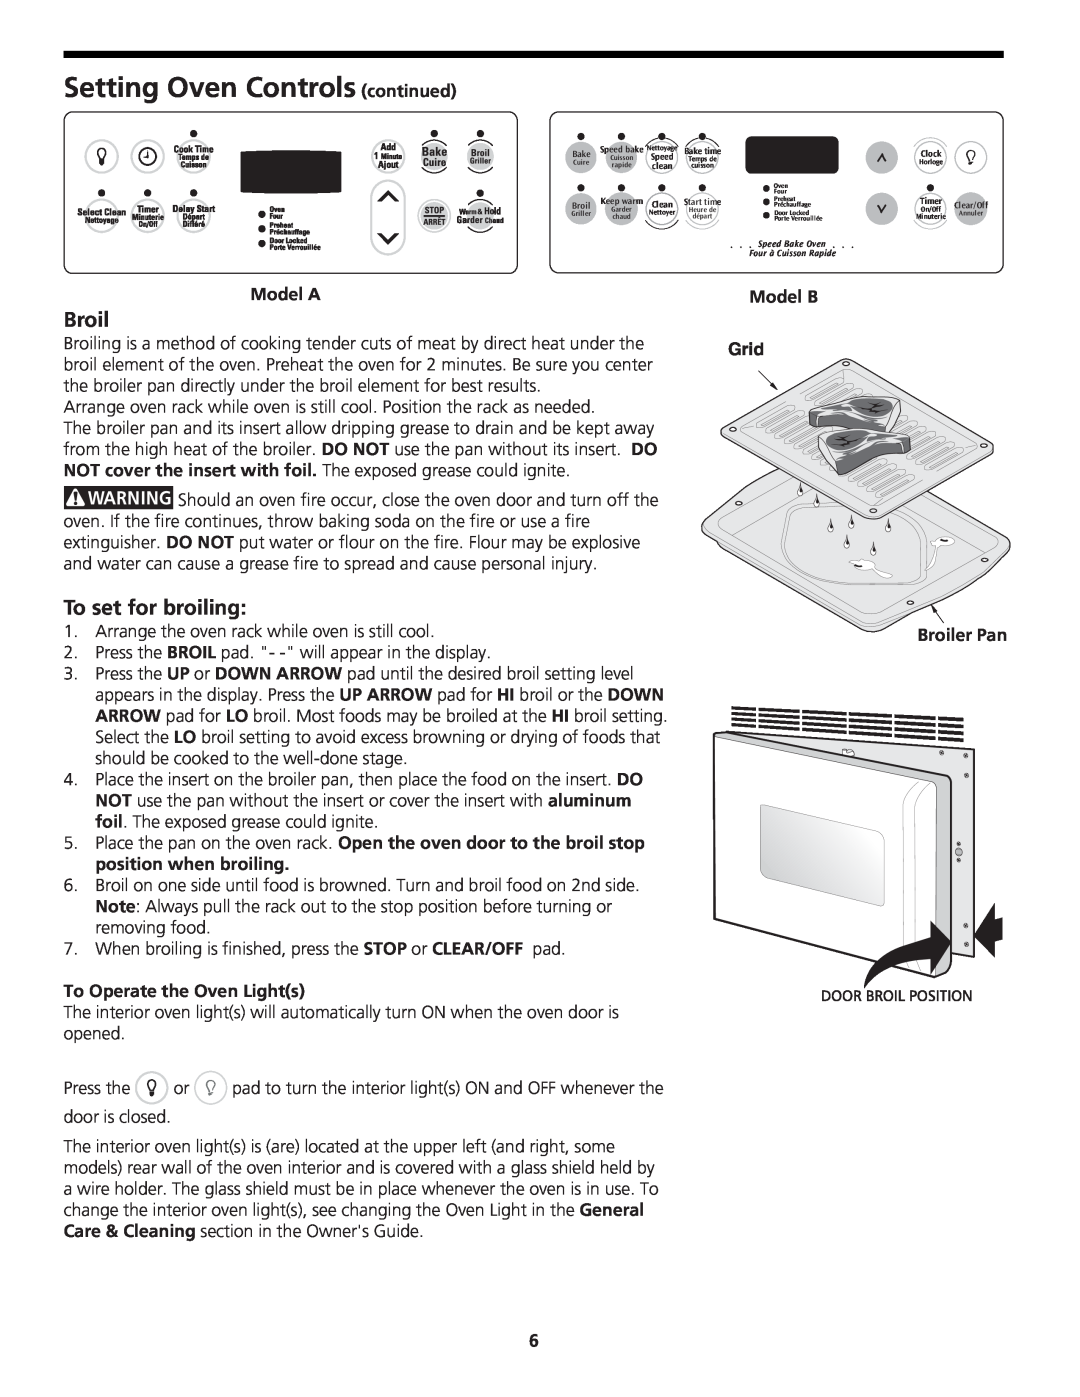 Frigidaire 318204142 (0802) Setting Oven Controls continued, Broil, To set for broiling, To Operate the Oven Lights, Grid 